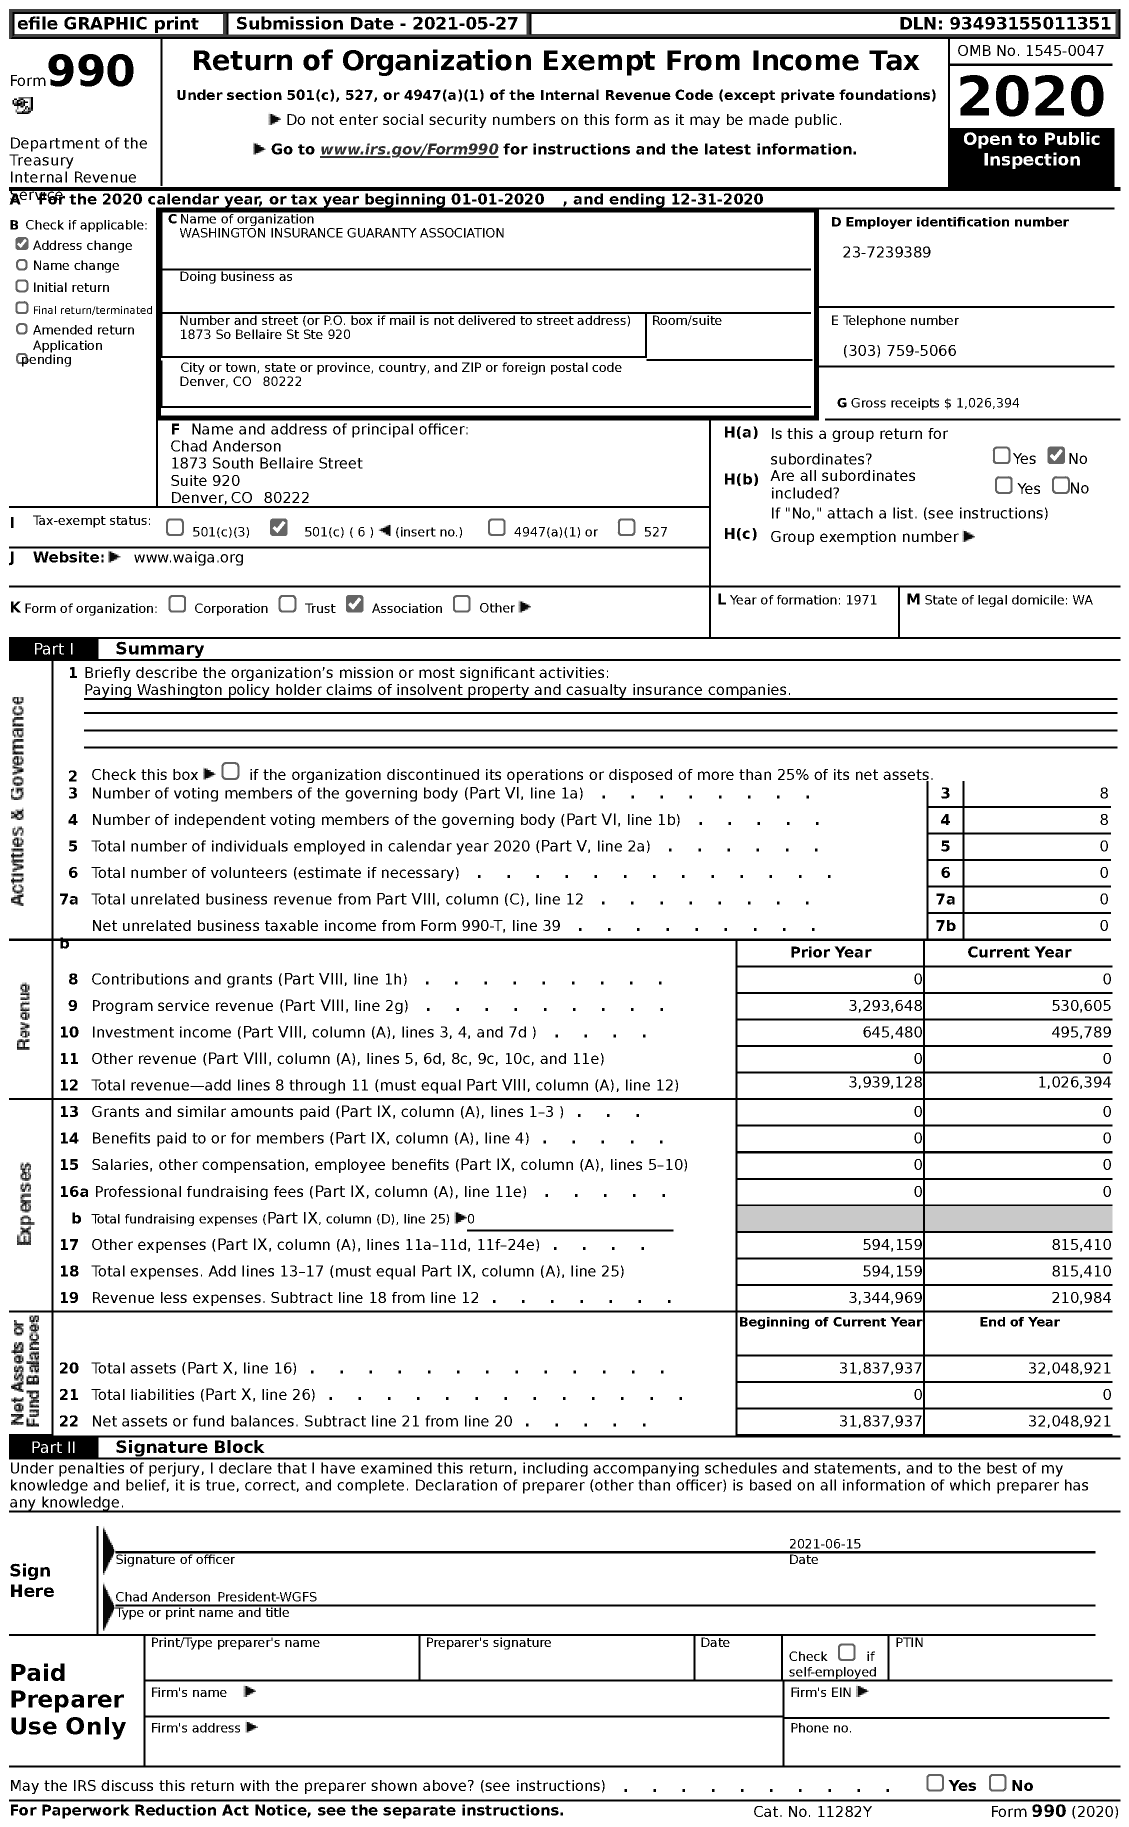 Image of first page of 2020 Form 990 for Washington Insurance Guaranty Association (WAGA)